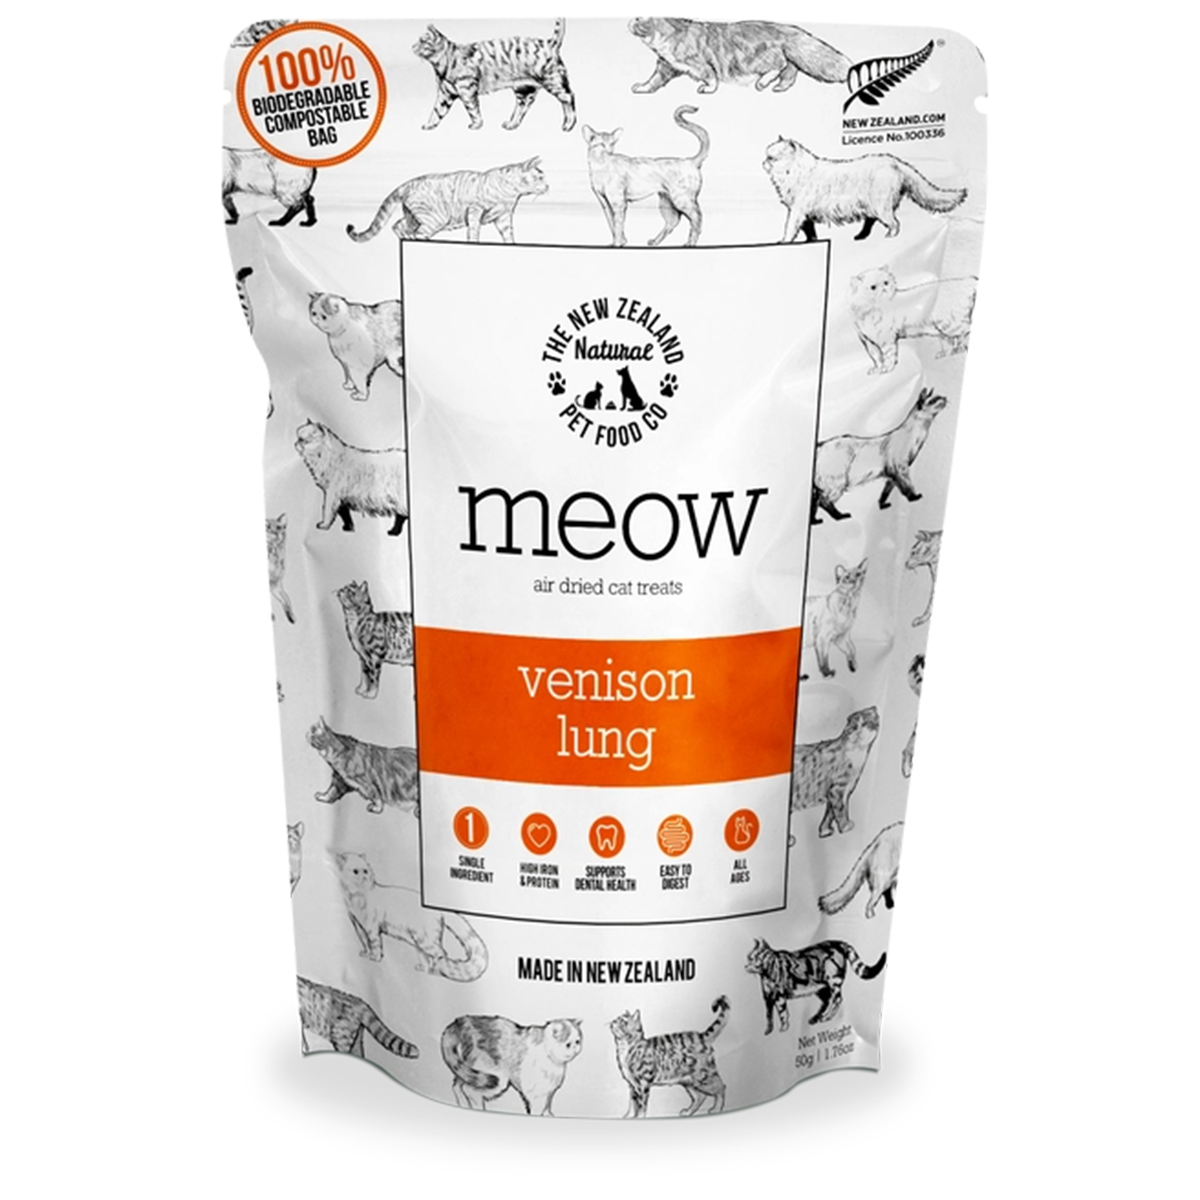 The New Zealand Natural Pet Food Co. Meow Air Dried Cat Treats - Venison Lung